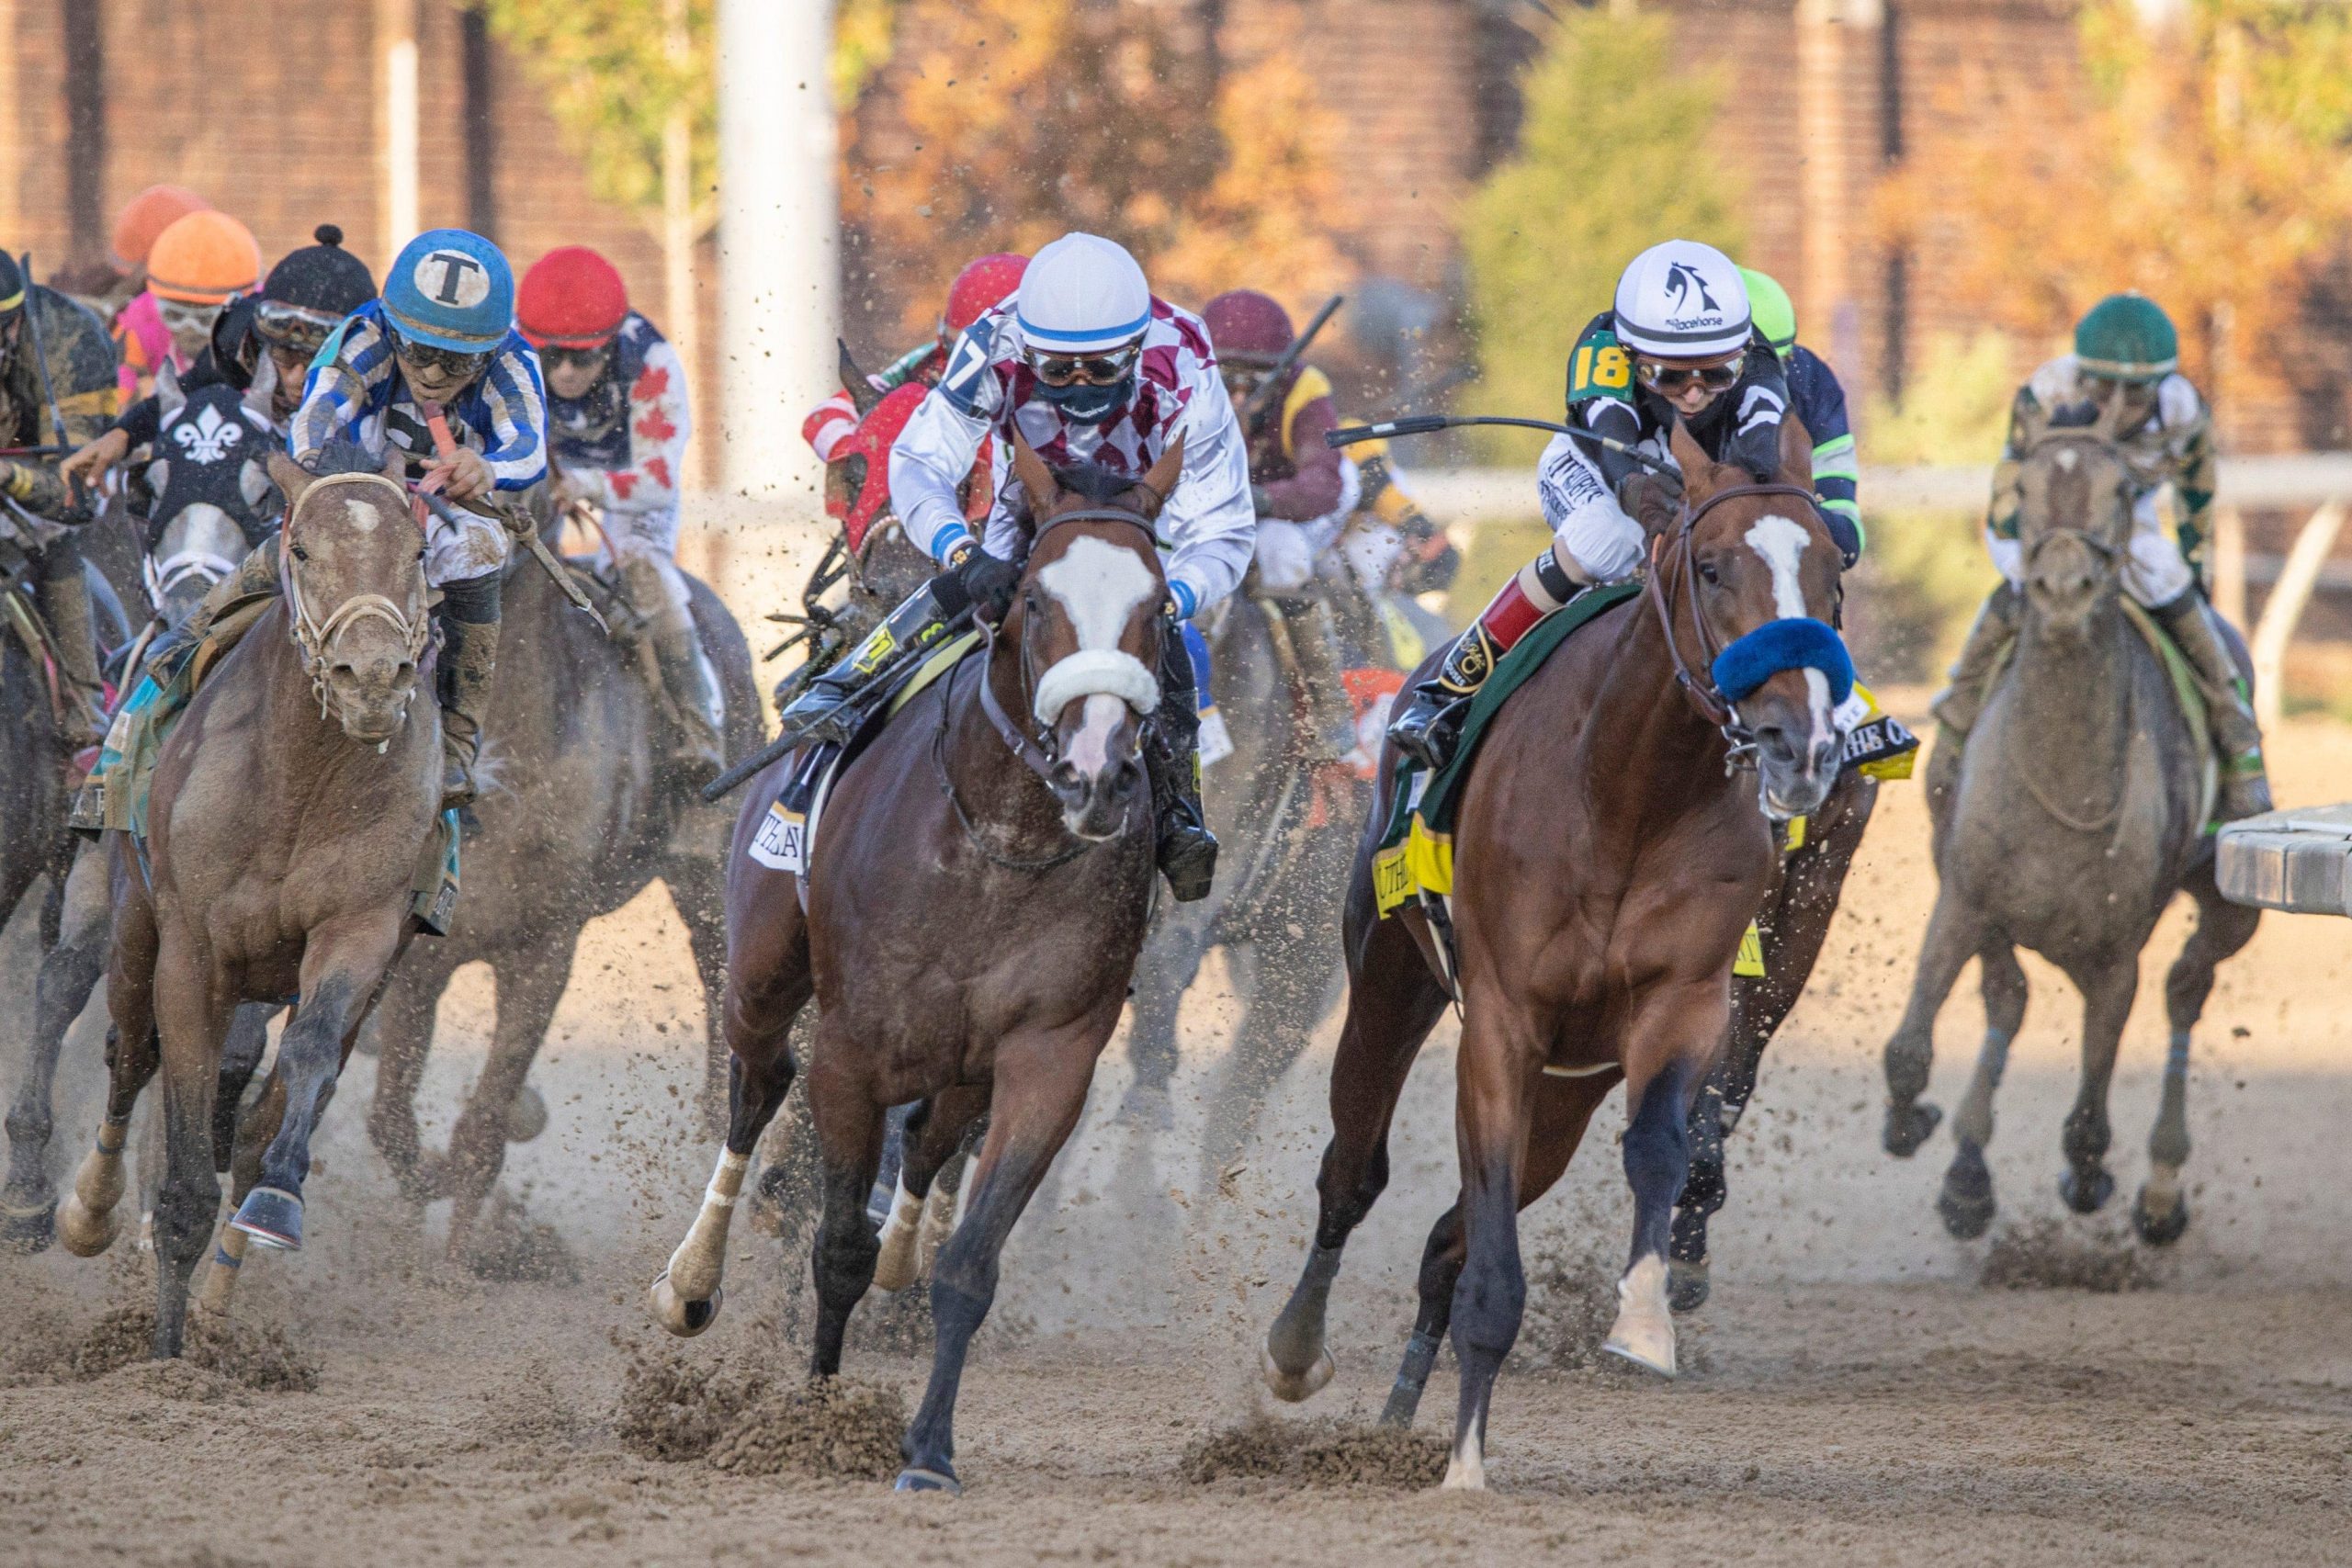 Tiz the Law, center left, ridden by jockey Manuel Franco and Authentic, center right, ridden by jockey John Velazquez, lead the field as they come out of the final turn during the running of the 146th Kentucky Derby.